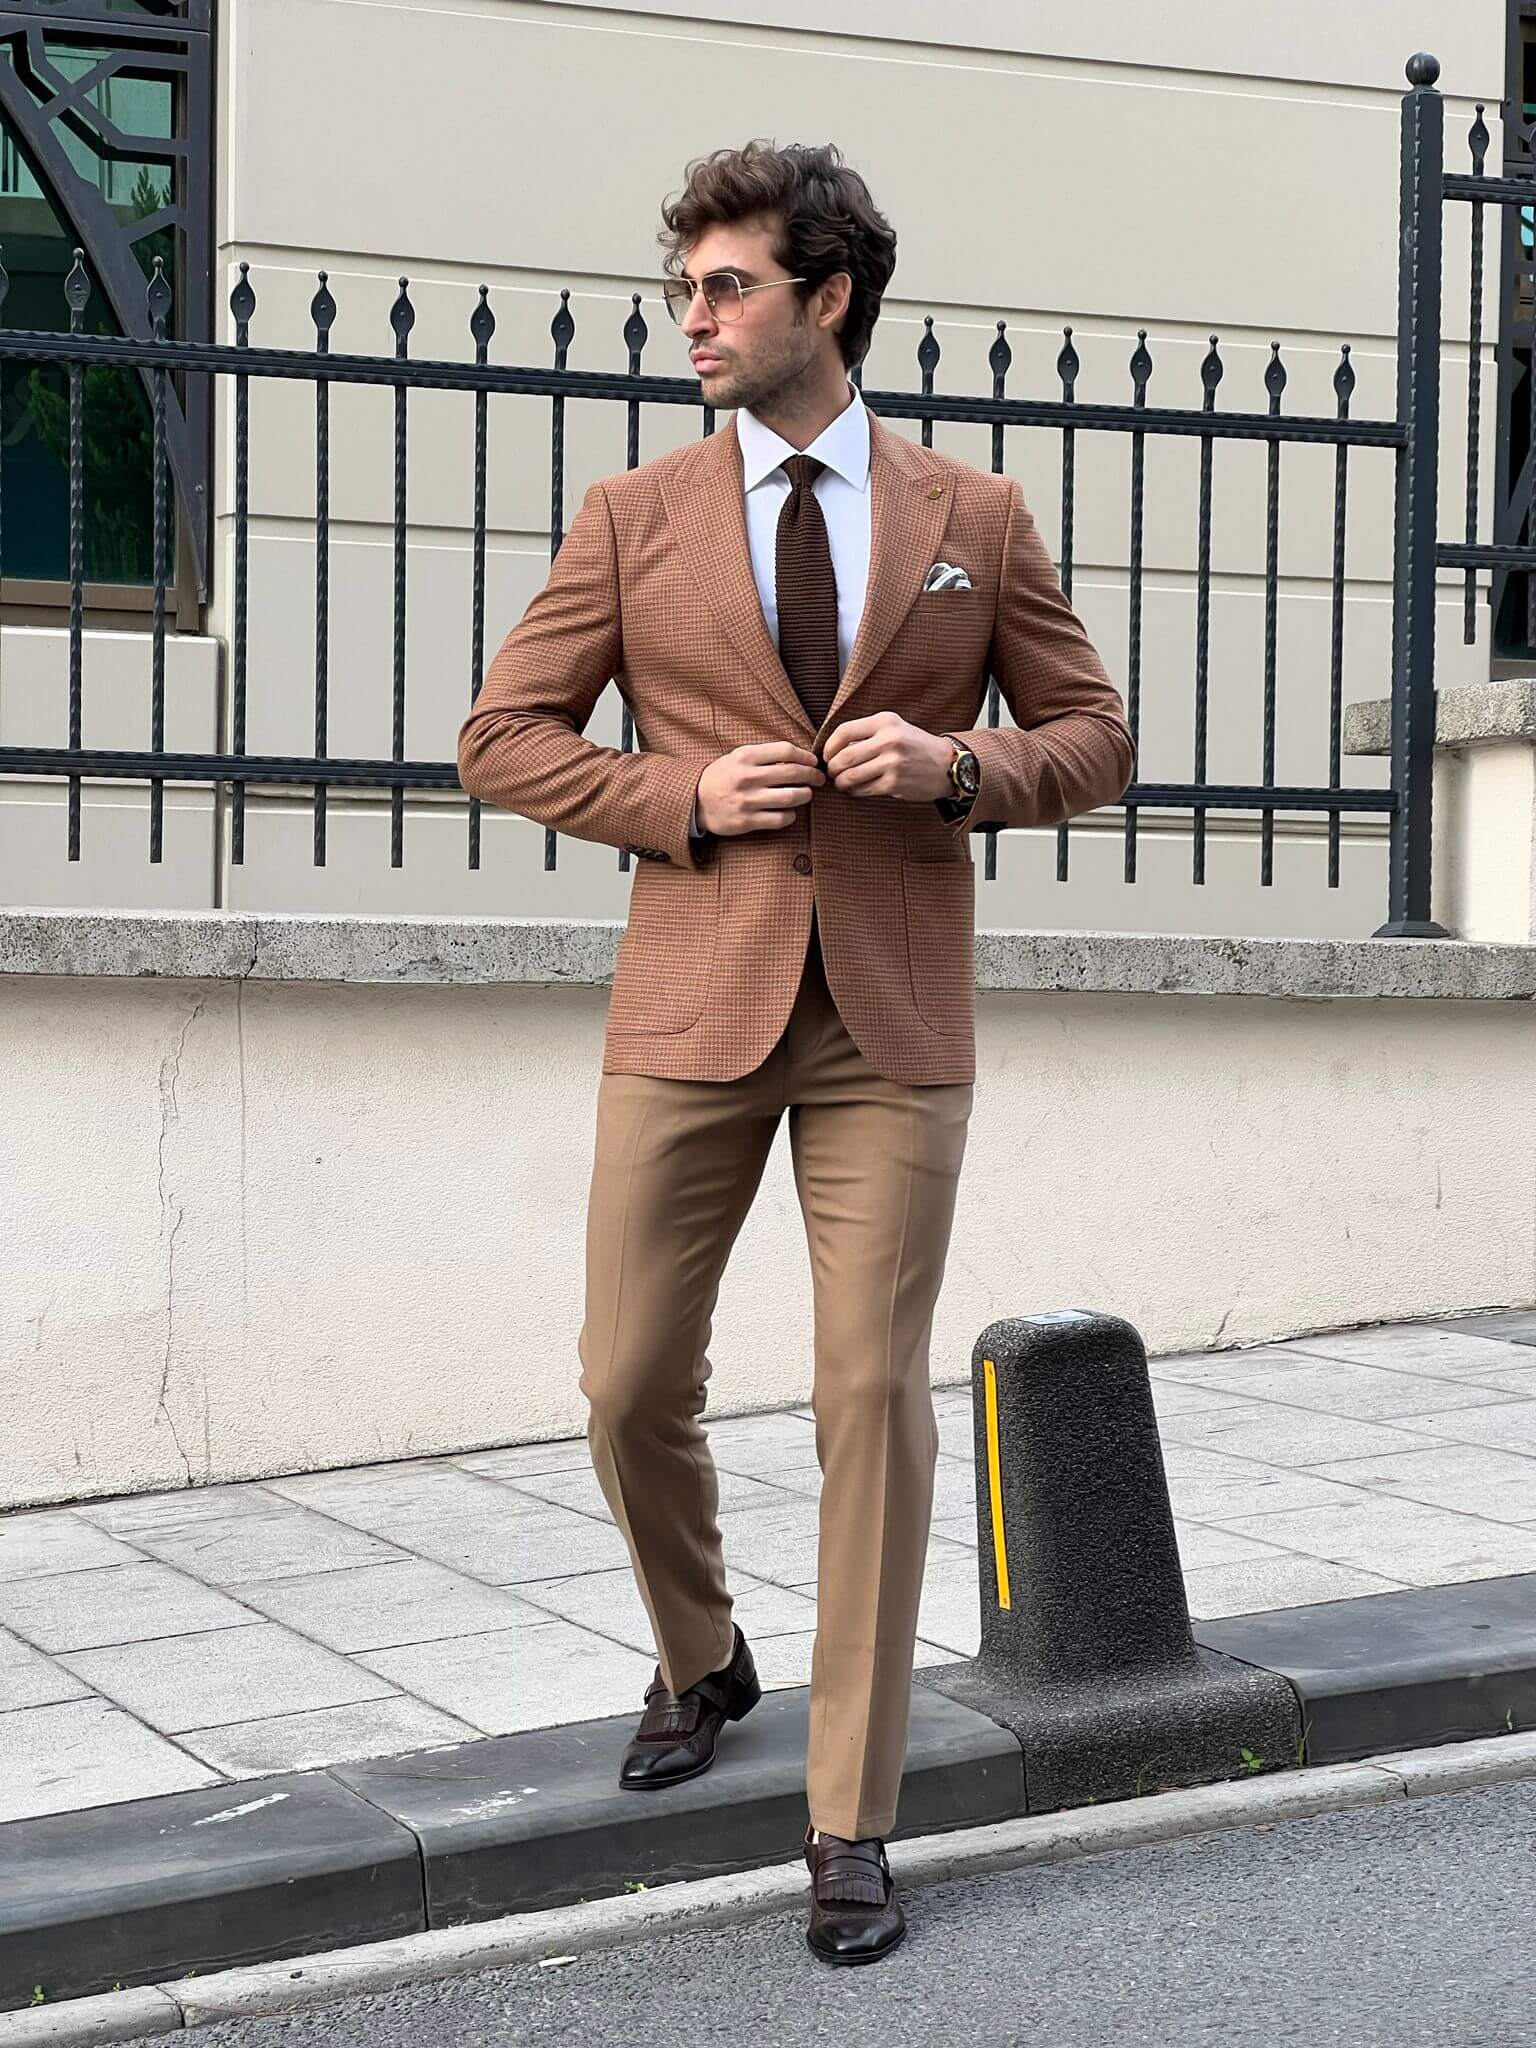 Embrace warmth and style with our Camel Wool Jacket, as showcased by our dapper male model.